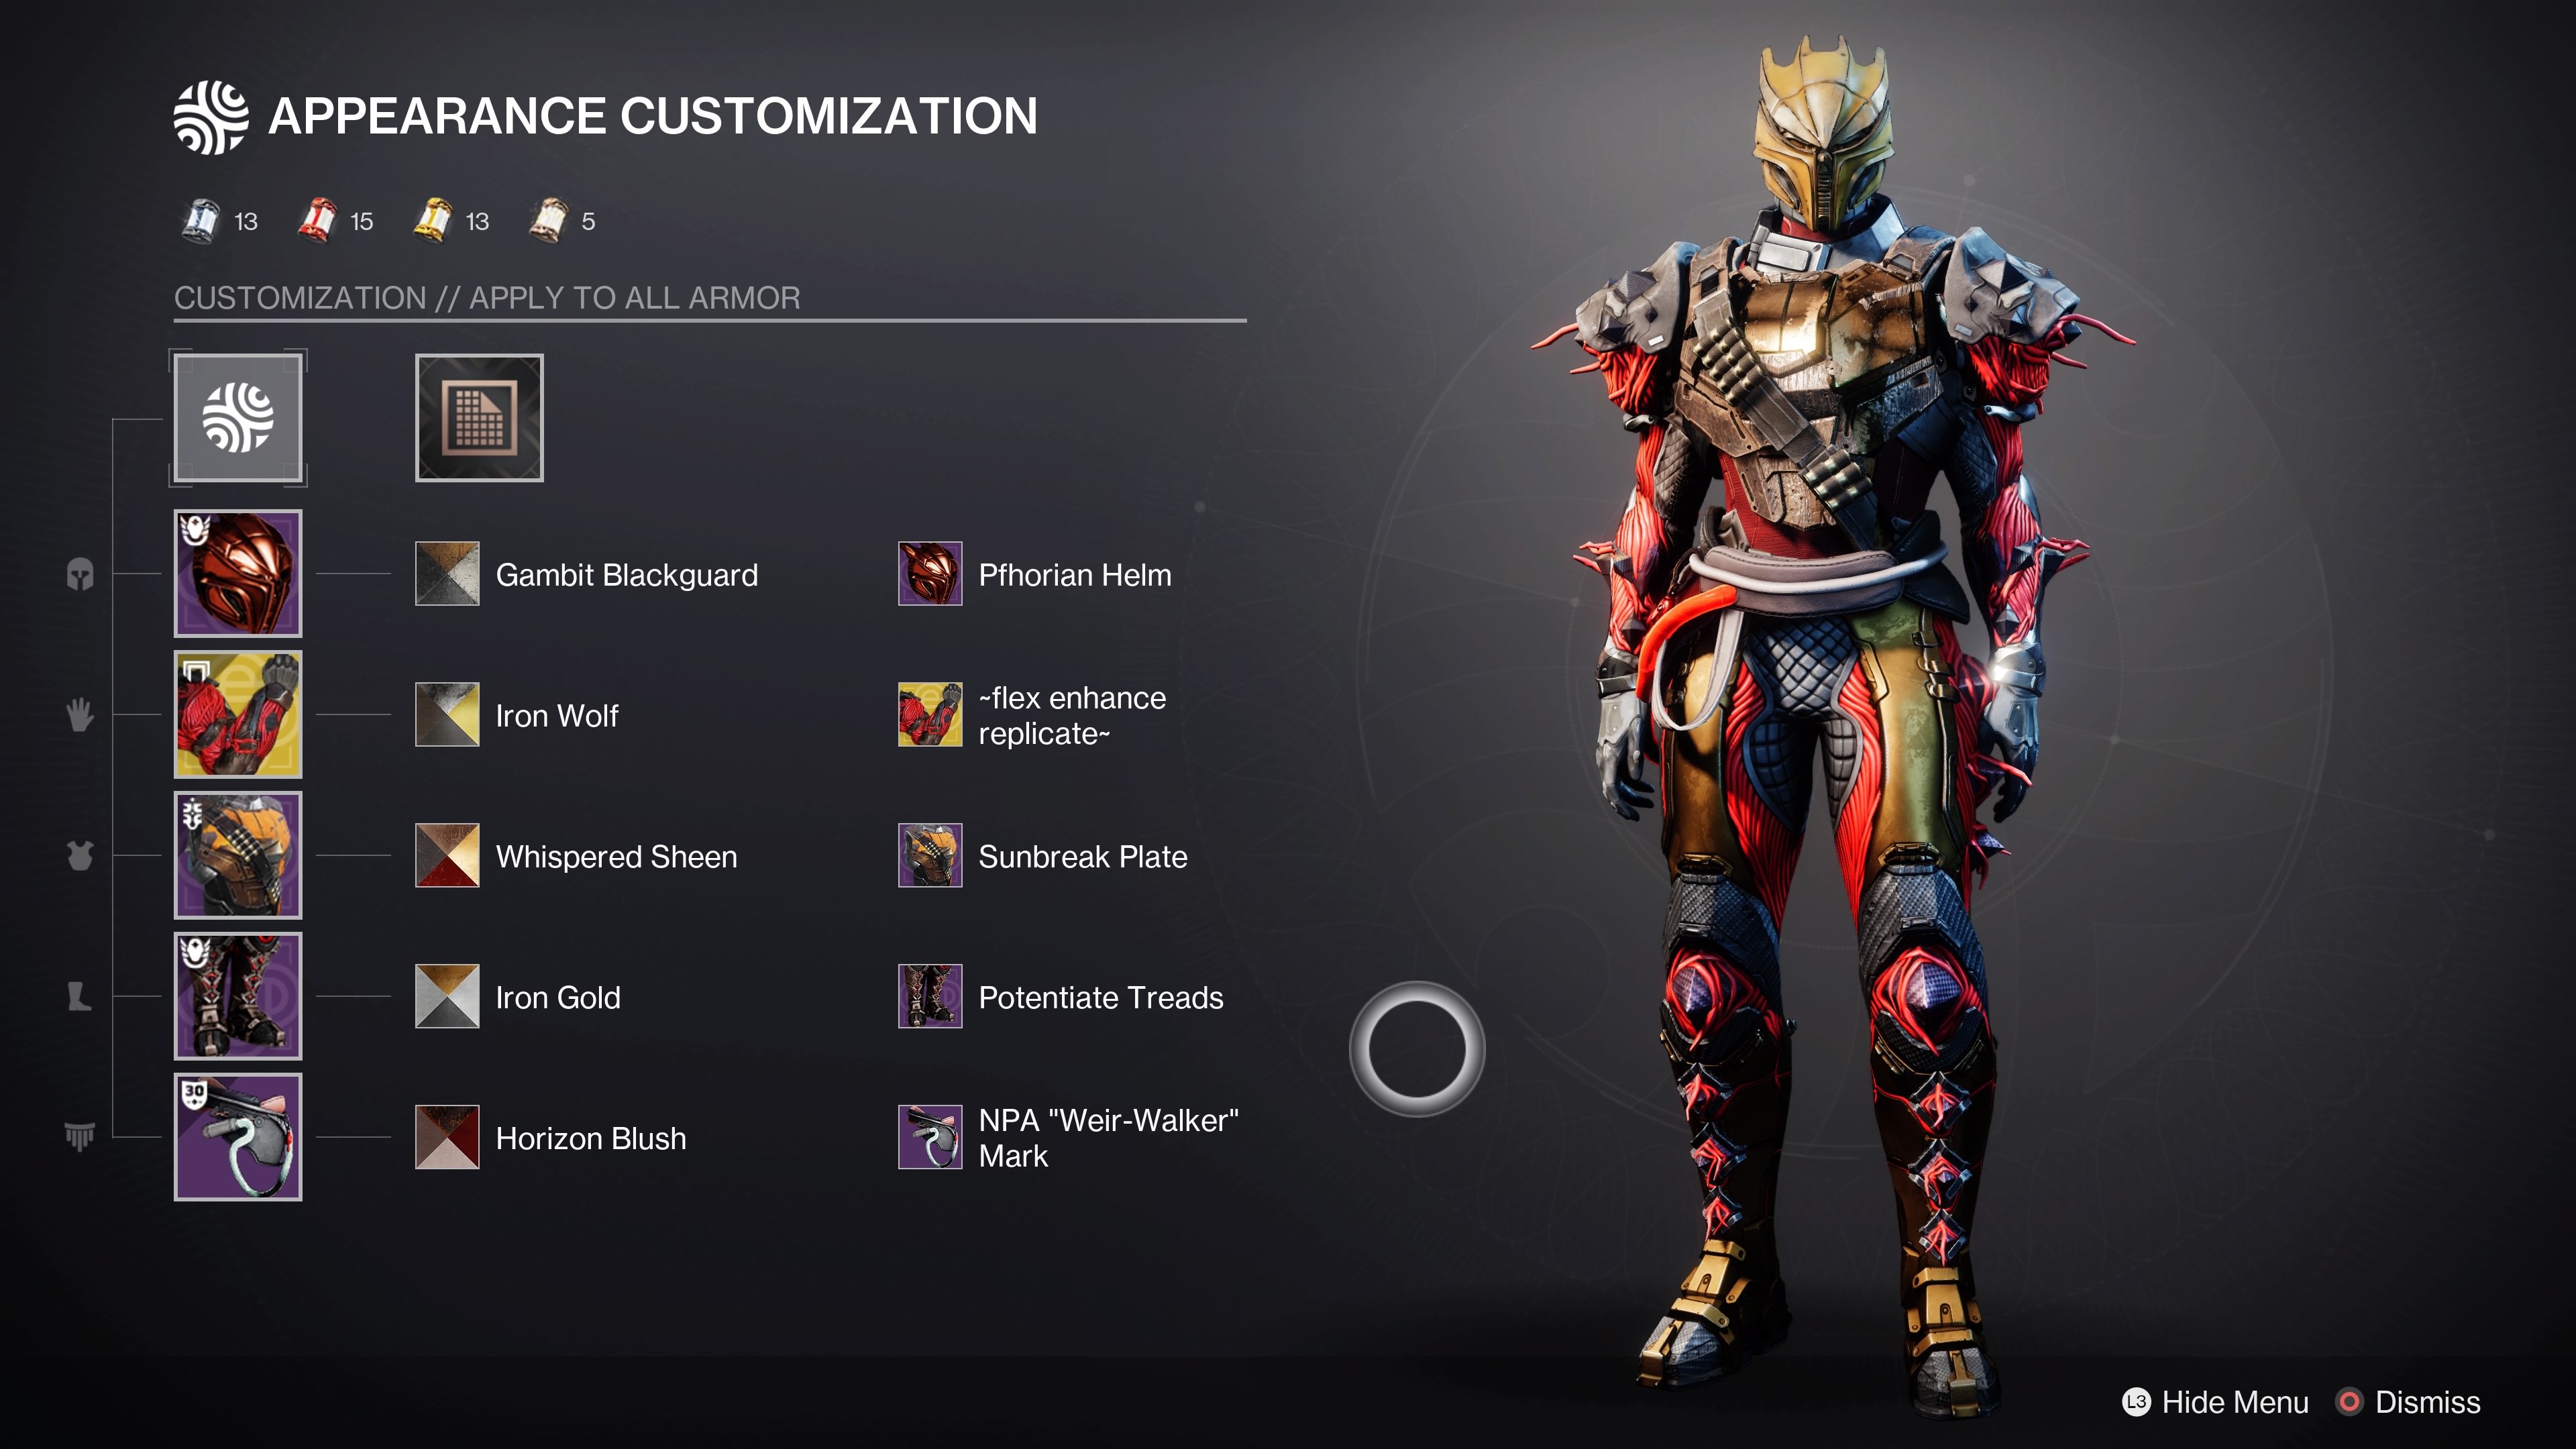 Destiny 2 armor customization screen. Titan in a red and gold Siva theme. 